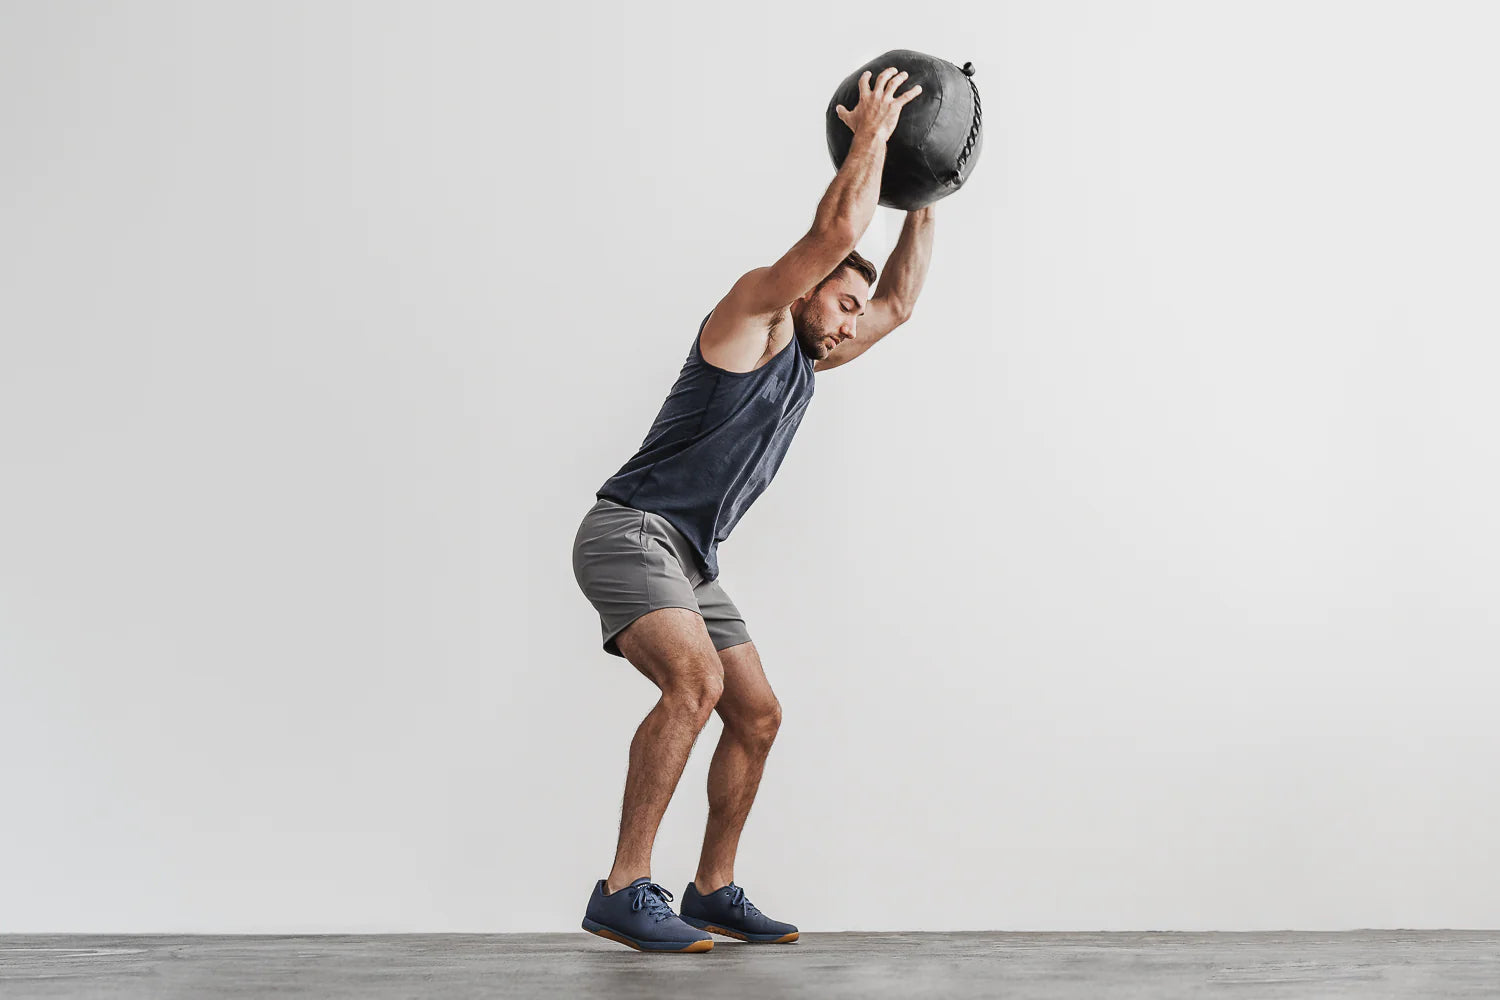 Athletic man is working out in athletic clothing and cross training shoes while throwing a medicine ball